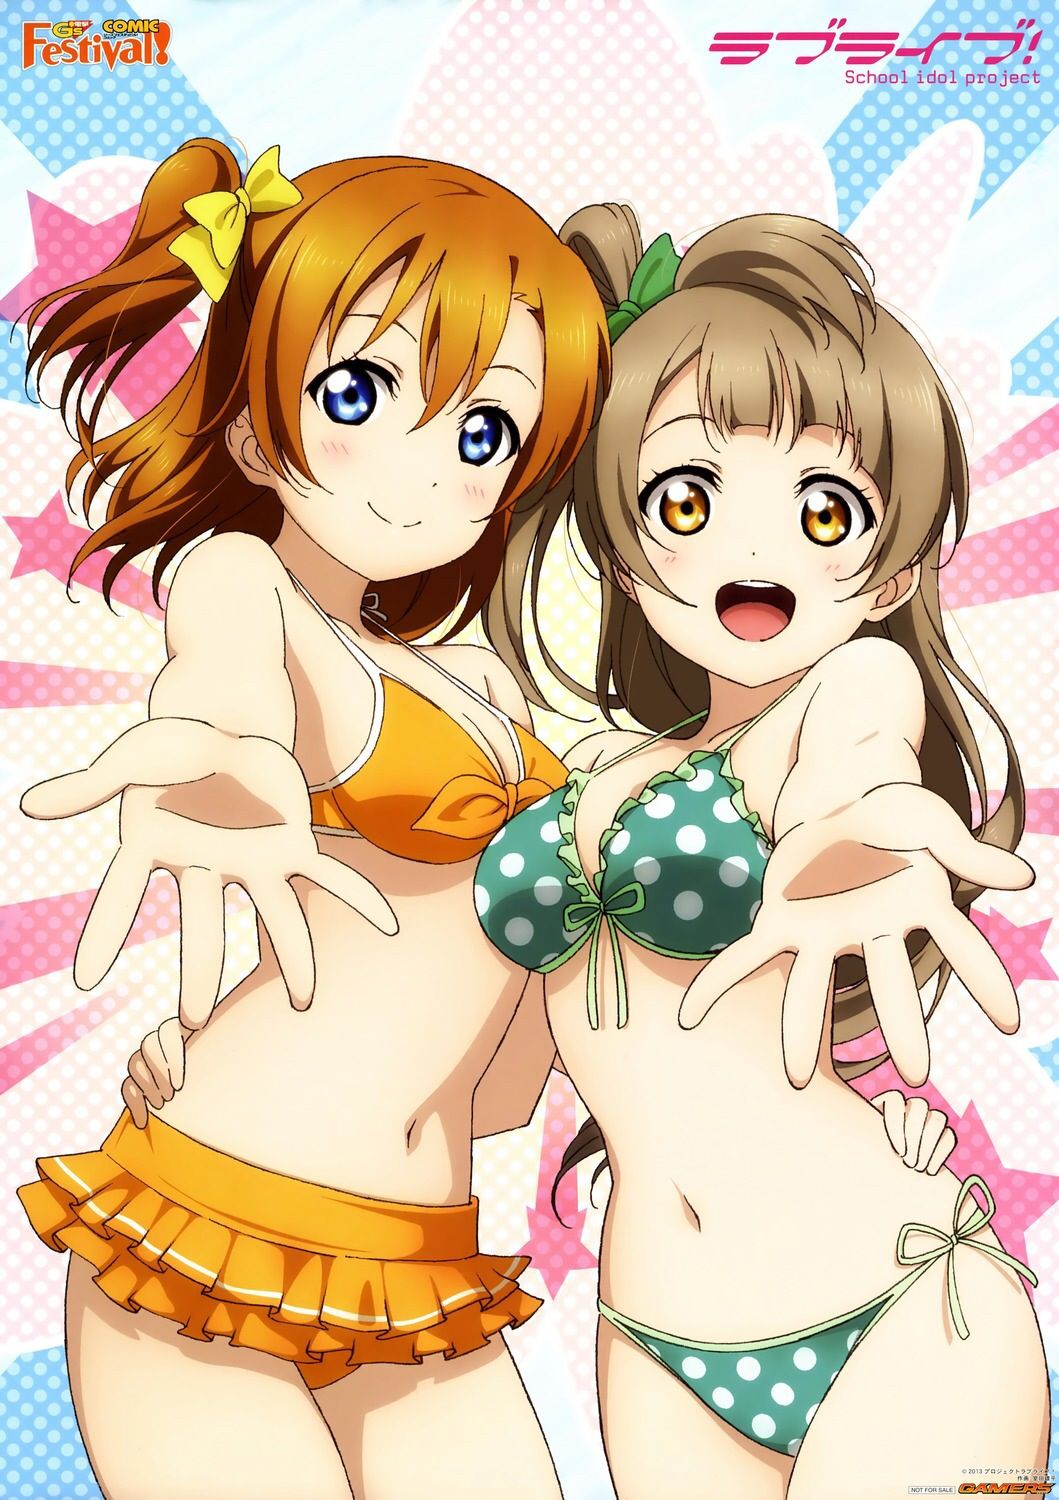 【With images】 The most erotic and syco character in the love live series wwwwwww 6